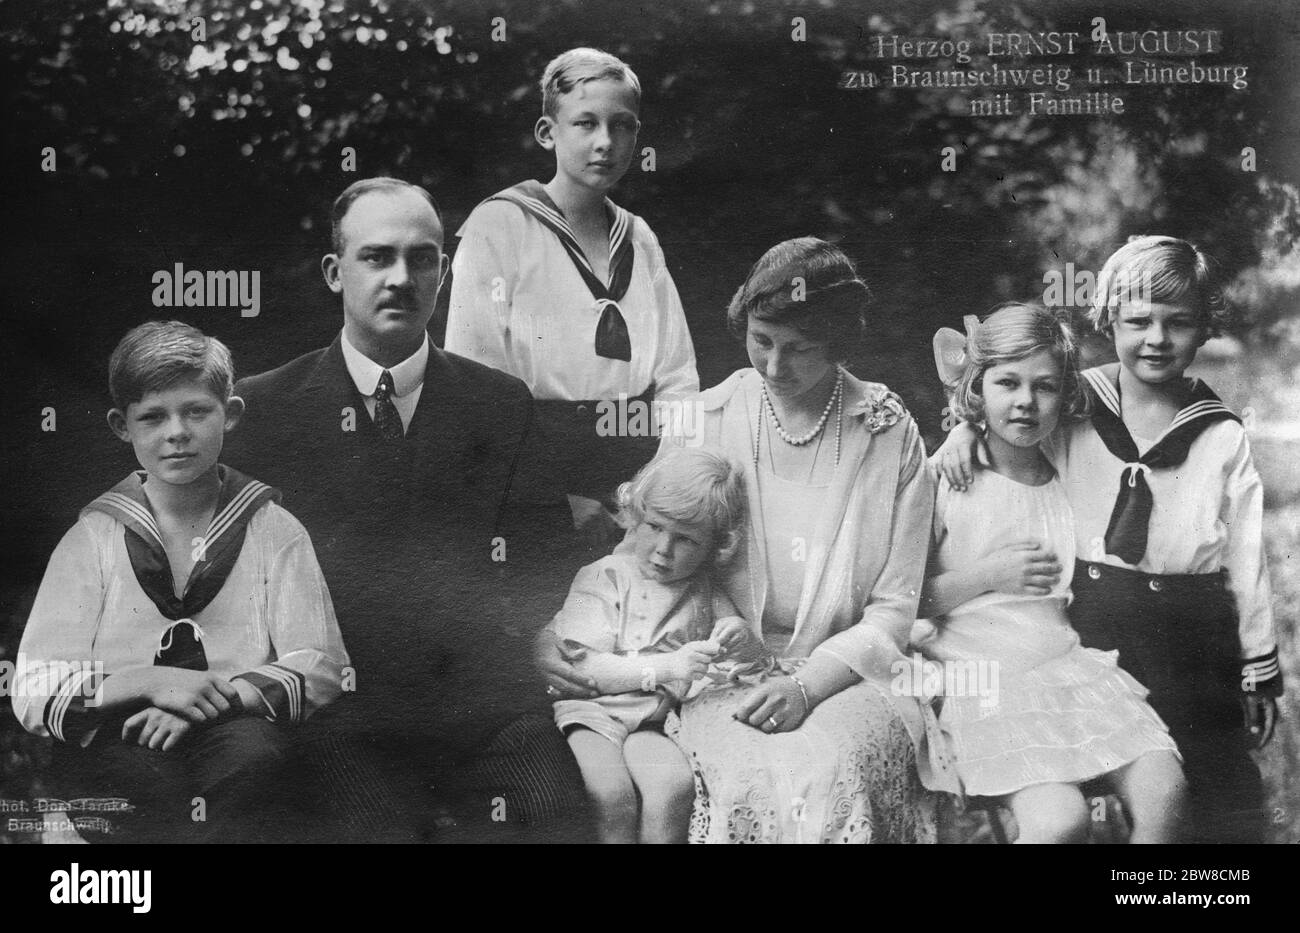 Kaiser ' s only daughter with her husband and children . From left to right the figures are ; Prince George Wilhelm , the ex reigning Duke of Brunswick , the ex Hereditary Prince Ernst August , Prince Welf Heinrich , the Duchess of Brunswick ( nee Princess Victoria Louise of Prussia ) , Princess Frederica and Prince Christian . 21 May 1927 Stock Photo